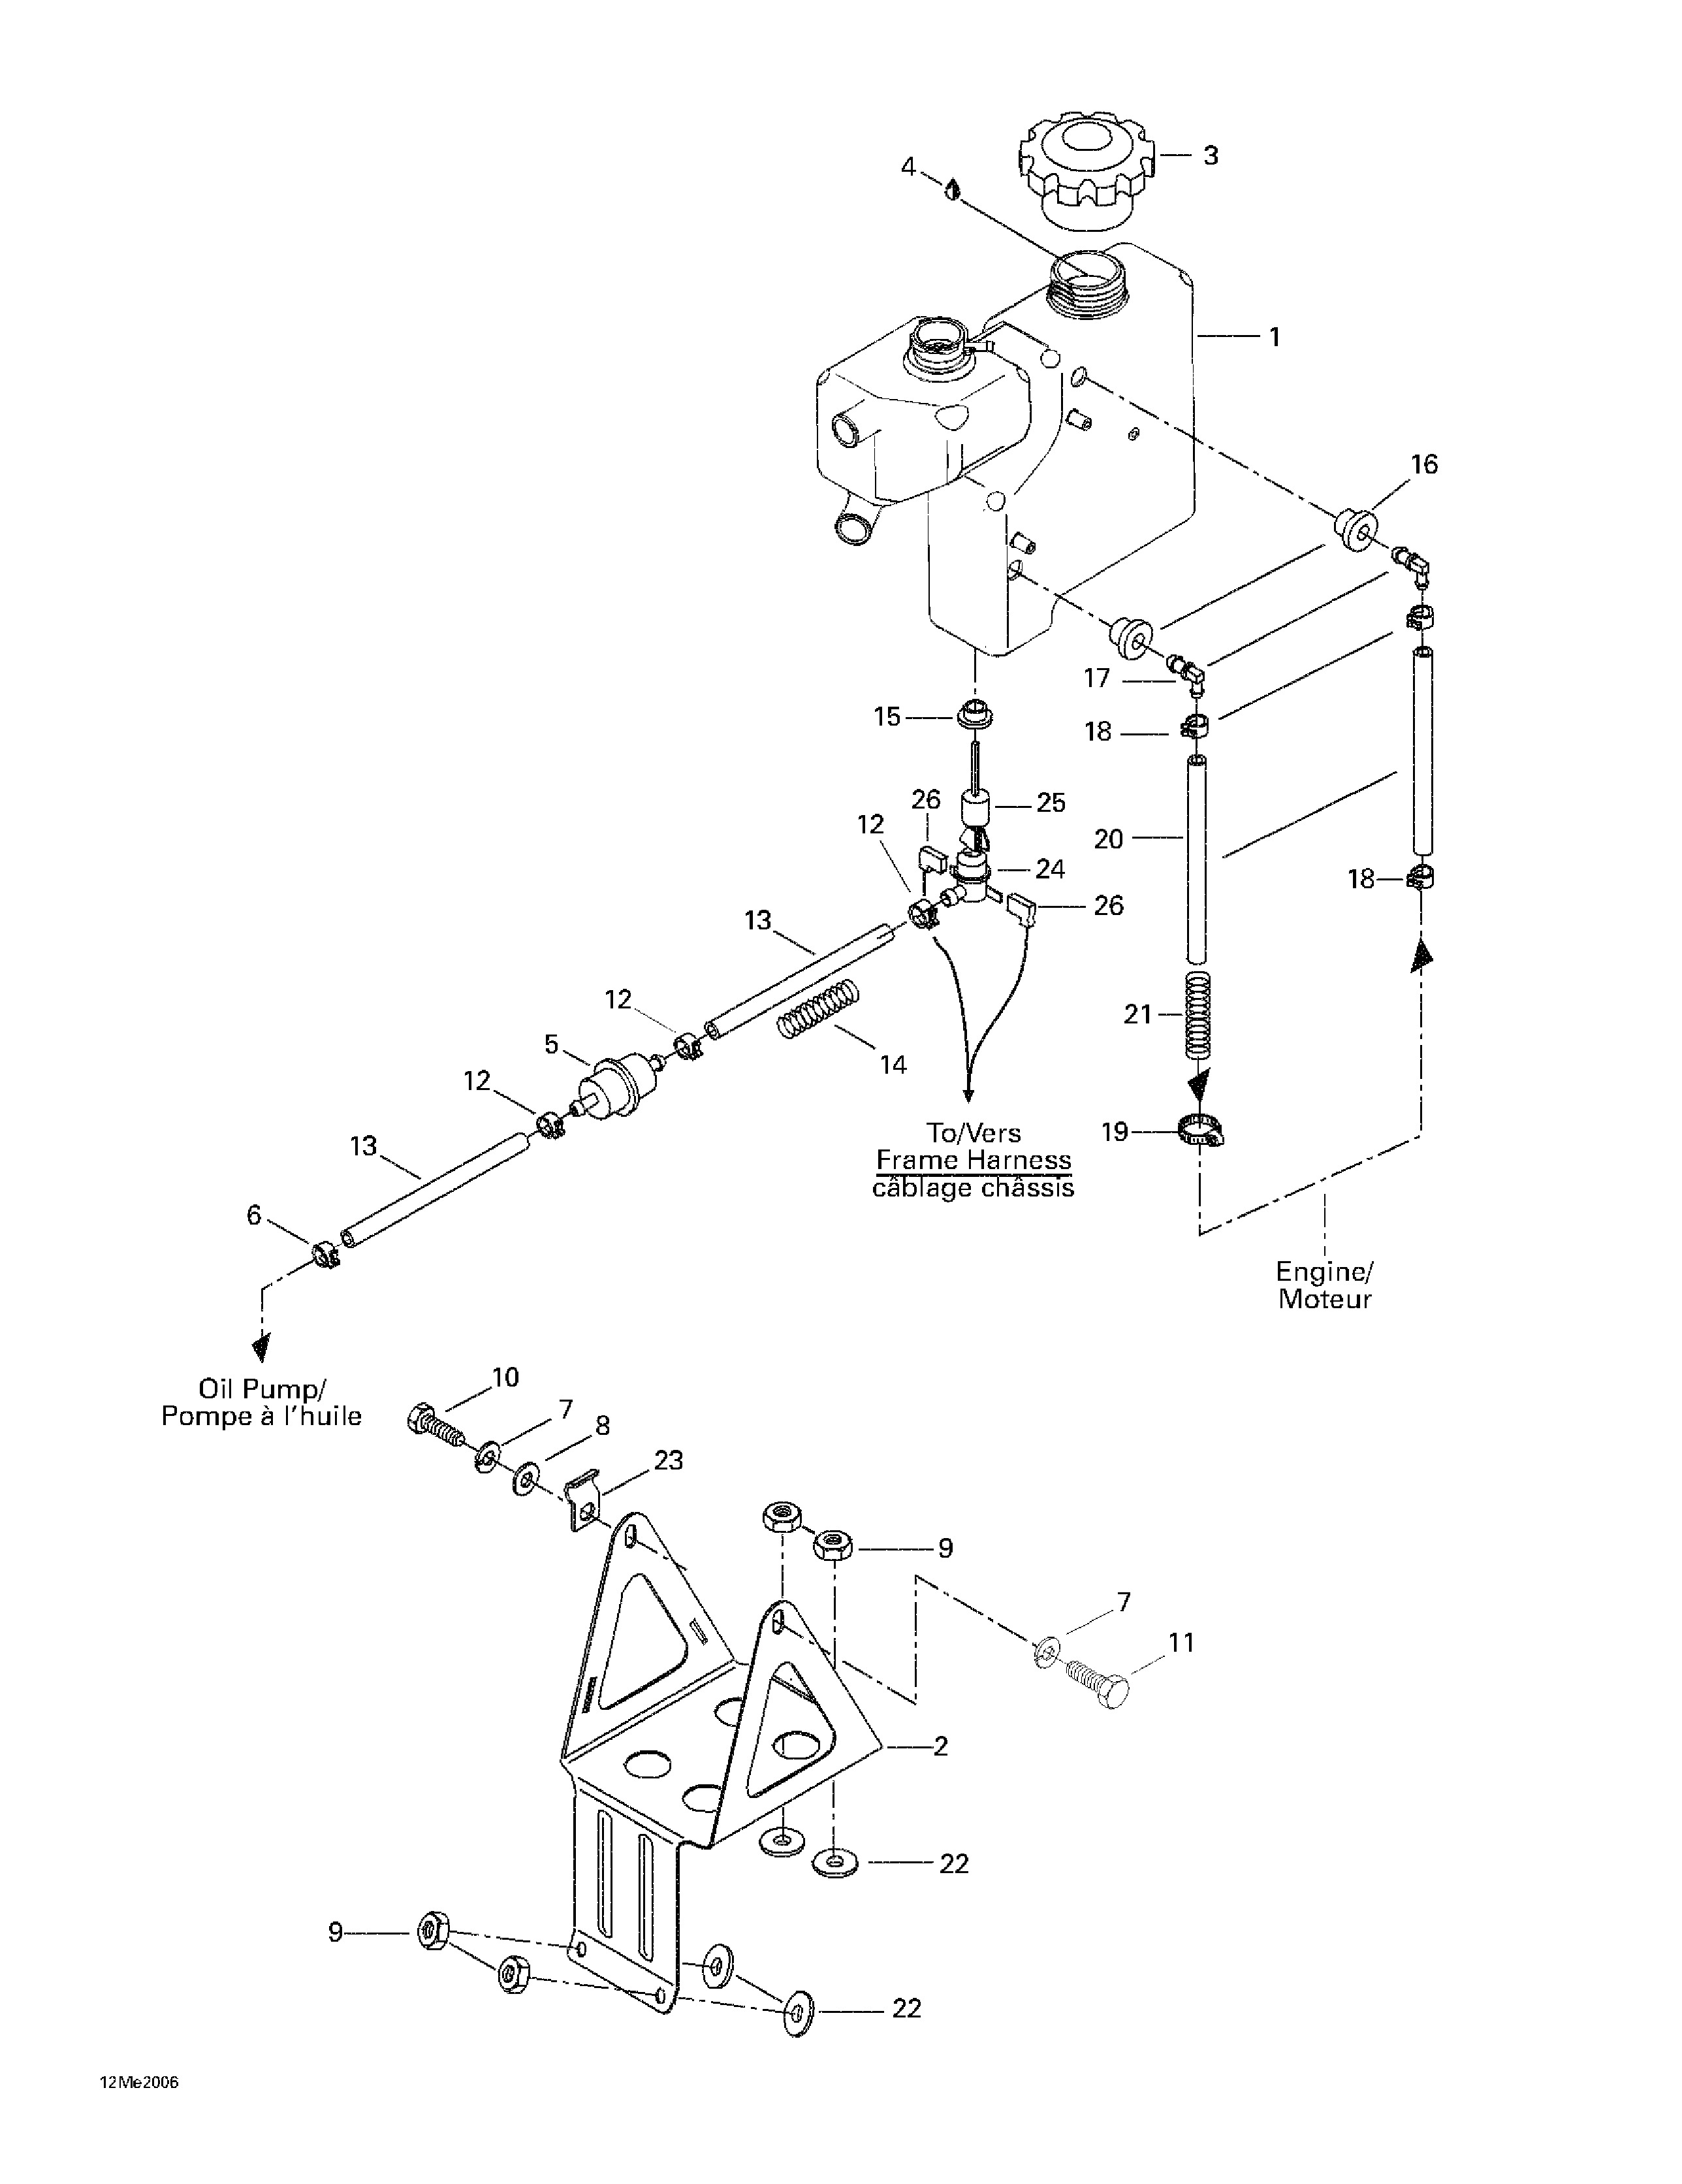 Oil tank and support